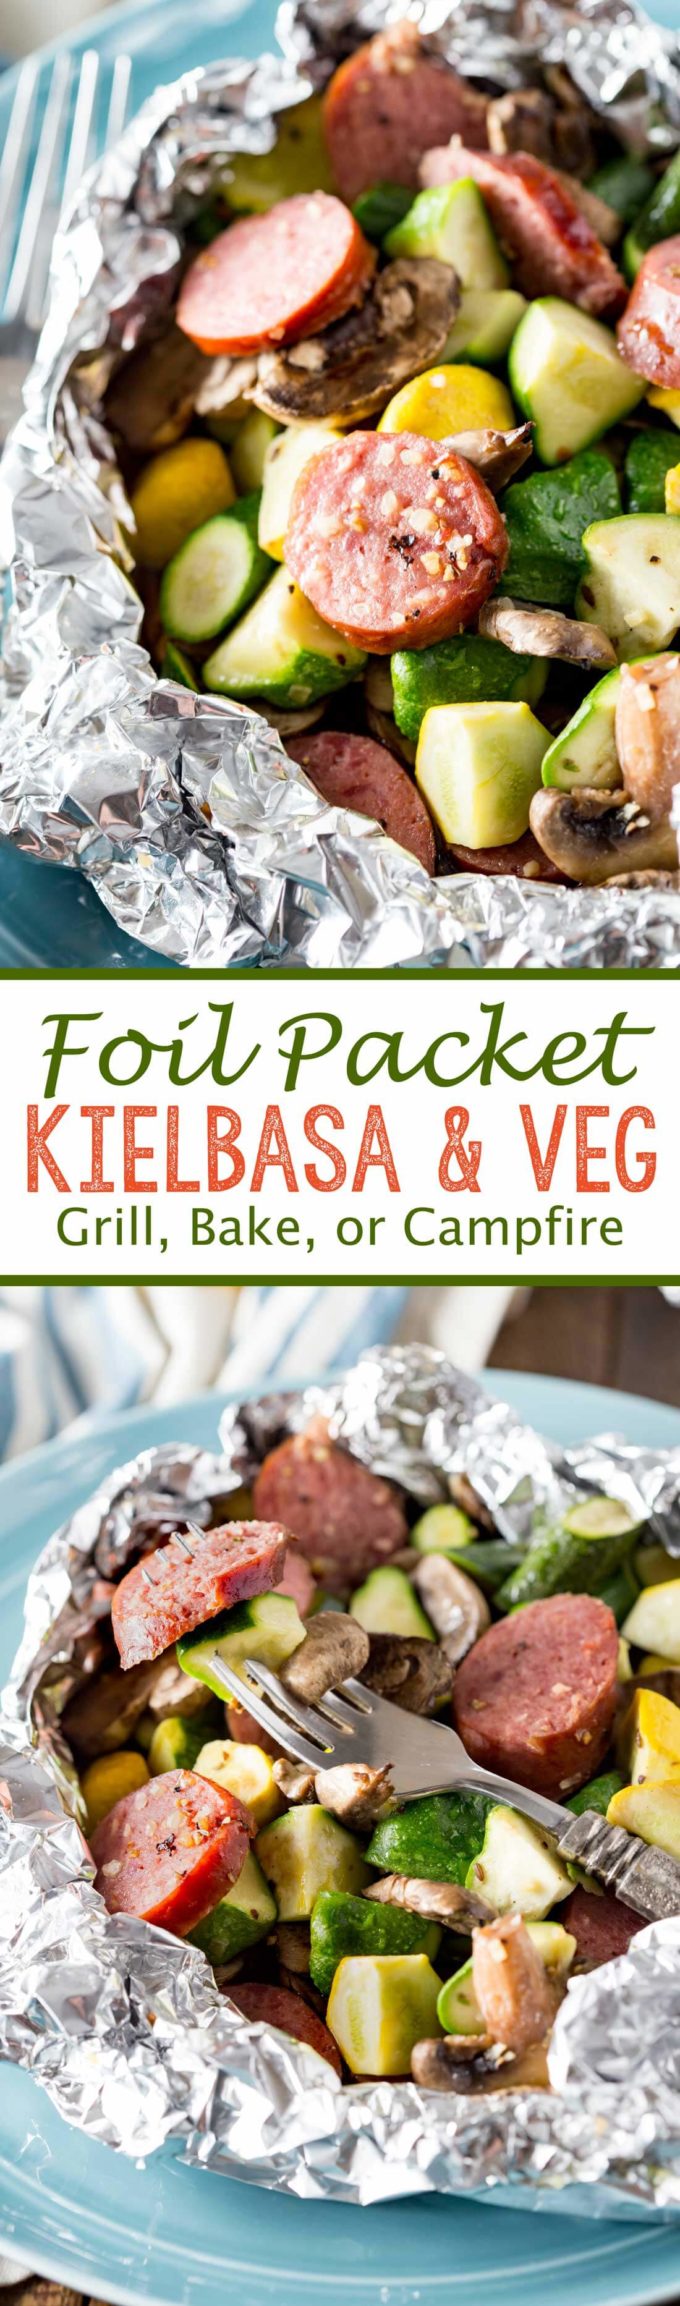 Kielbasa Recipes: Kielbasa sausage and fresh garden yellow squash and zucchini, and mushrooms, lightly seasoned, and cooked in Handi-Foil for the perfect, simple meal.